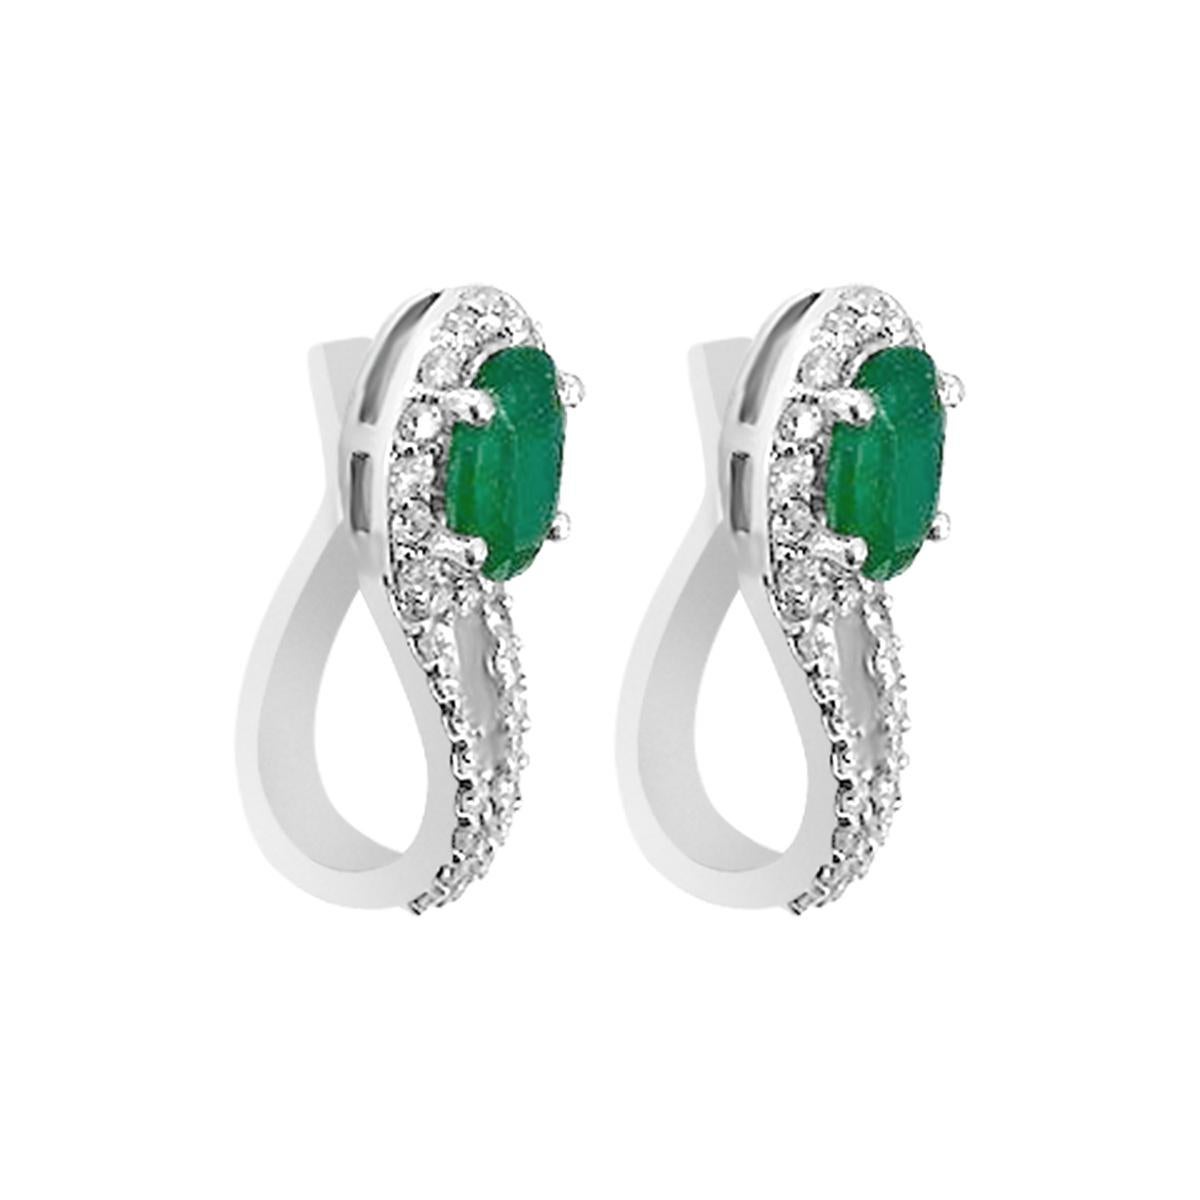 These Dangle Earrings Are The True Definition Of Art And Precision.
Exquisite Oval Shaped 7x5mm Emerald And Diamond Dangle Earring In 18K White Gold.
Intense Green Emerald Accentuated With Diamonds Are Set In An Artistic Way To Complete An Amusing